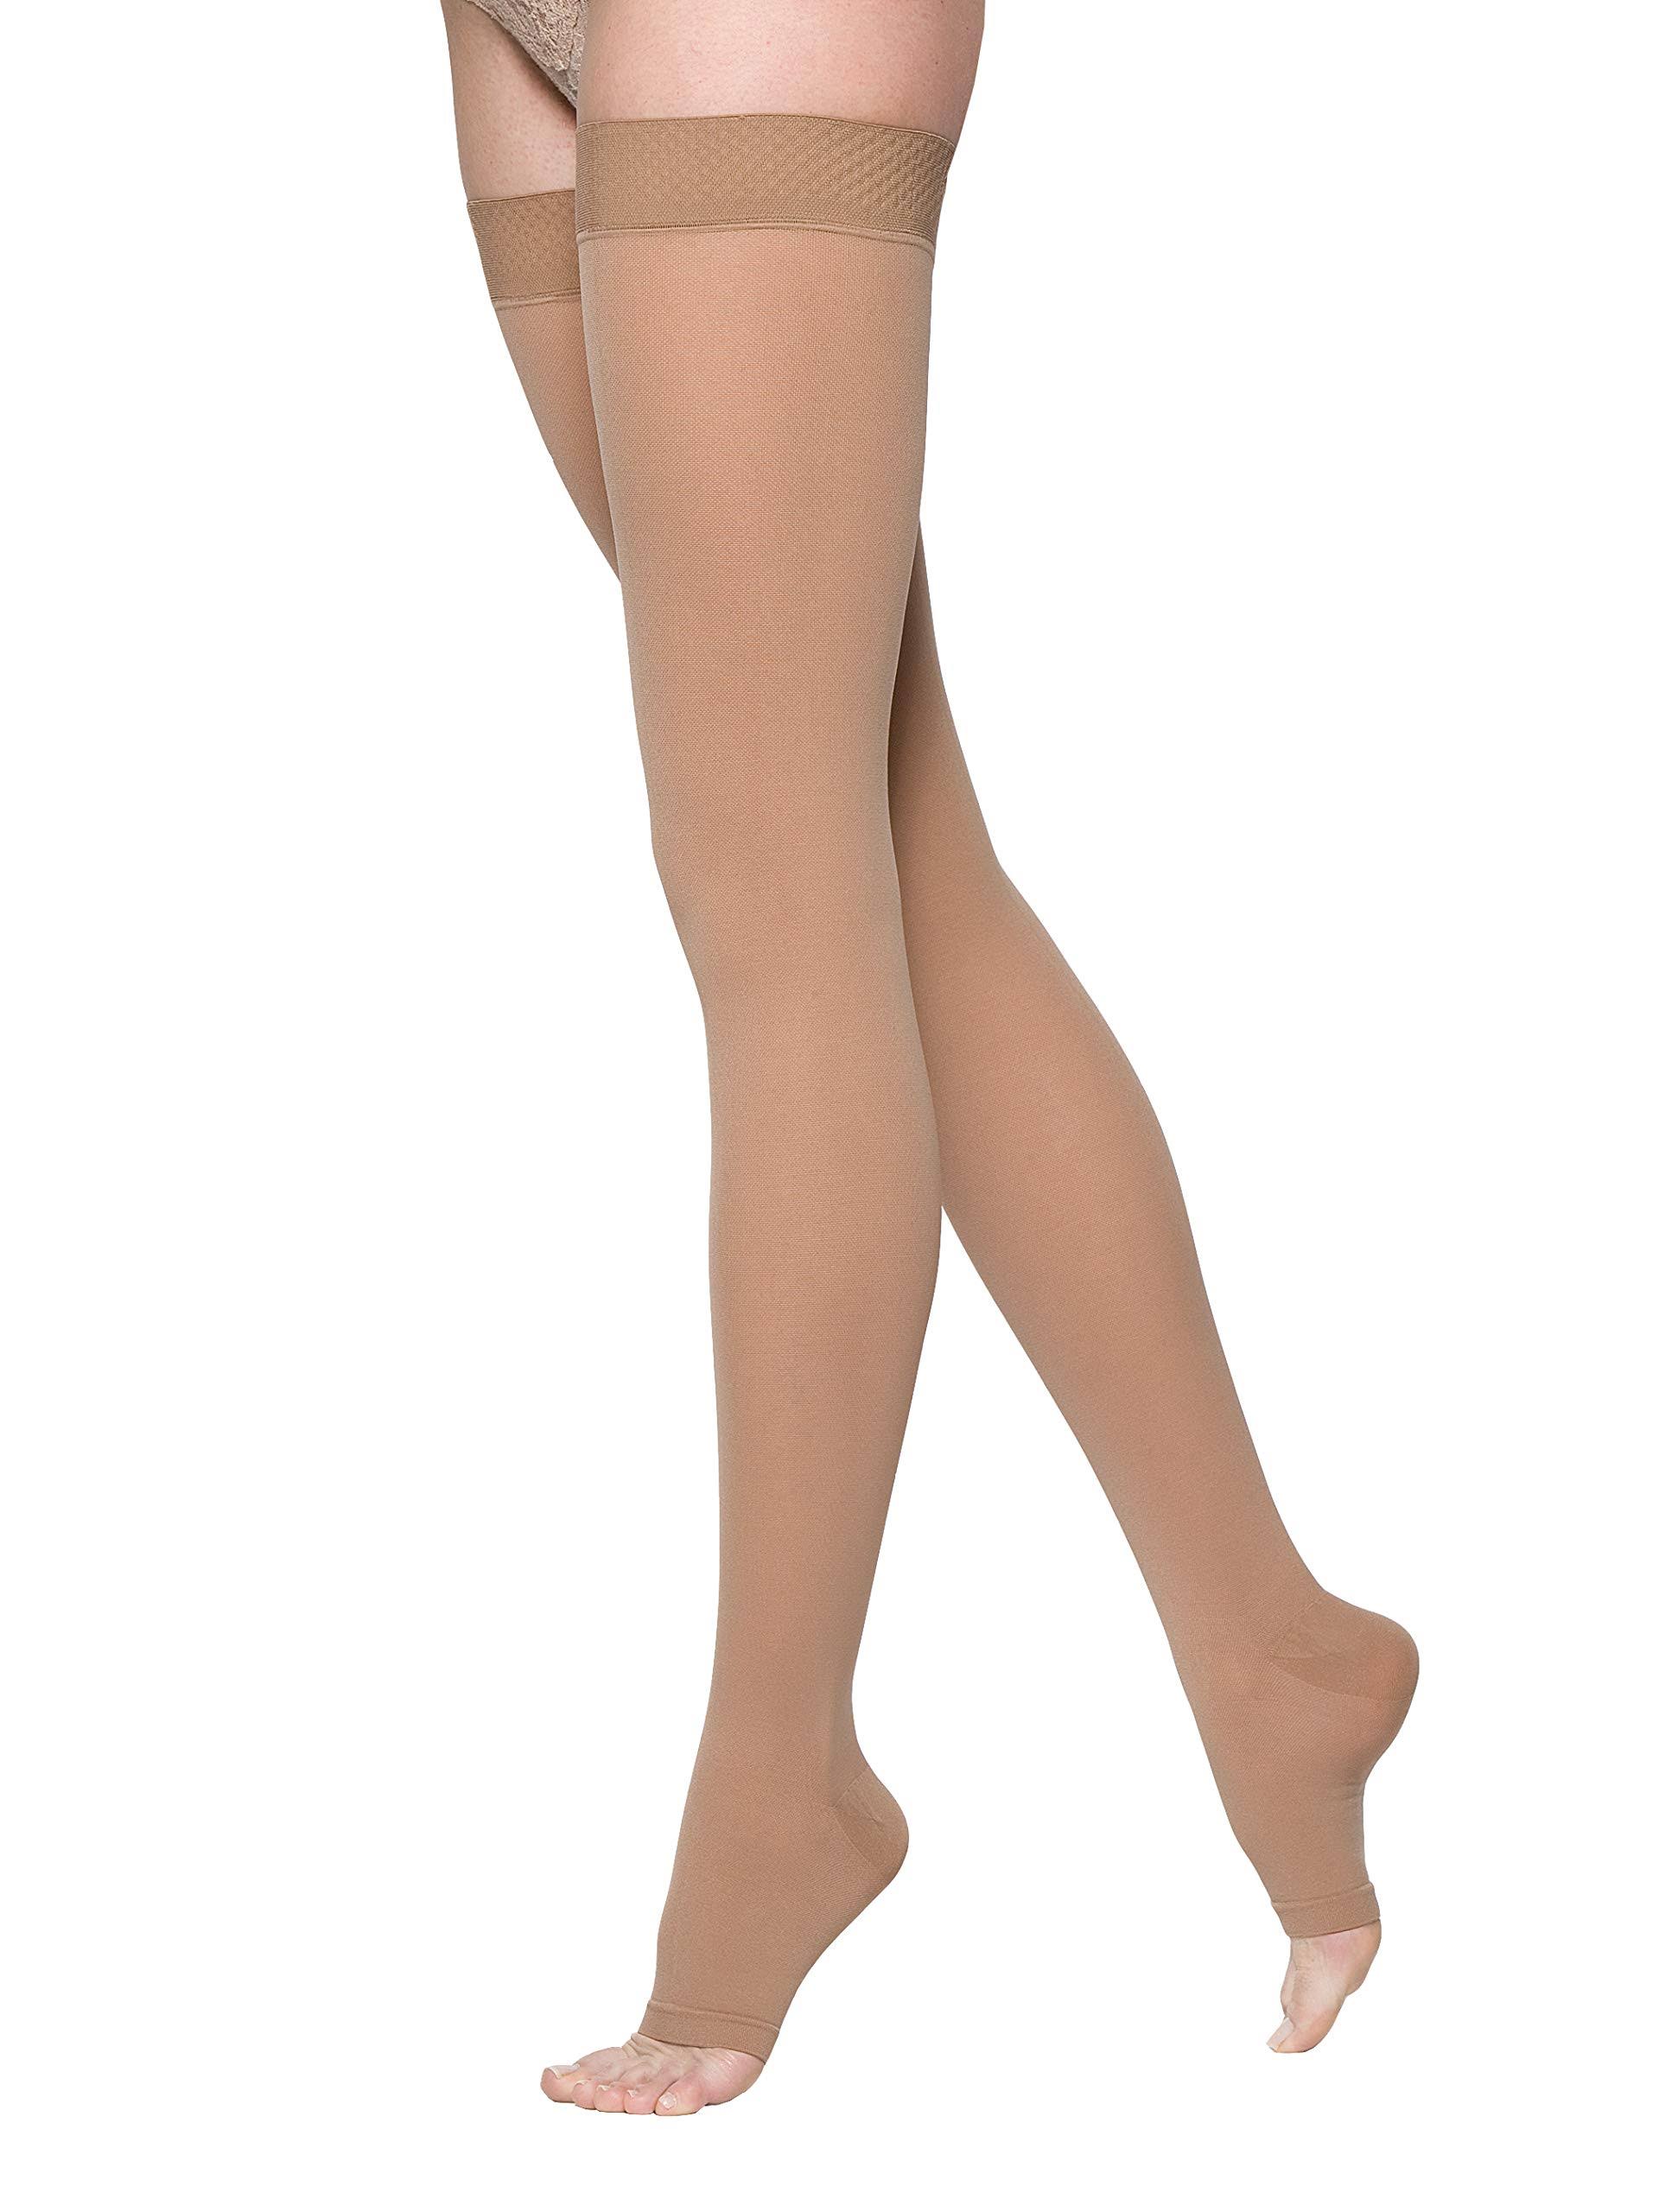 Sigvaris Select Comfort Thigh High w/ Grip Top, Open Toe 30-40mmHg